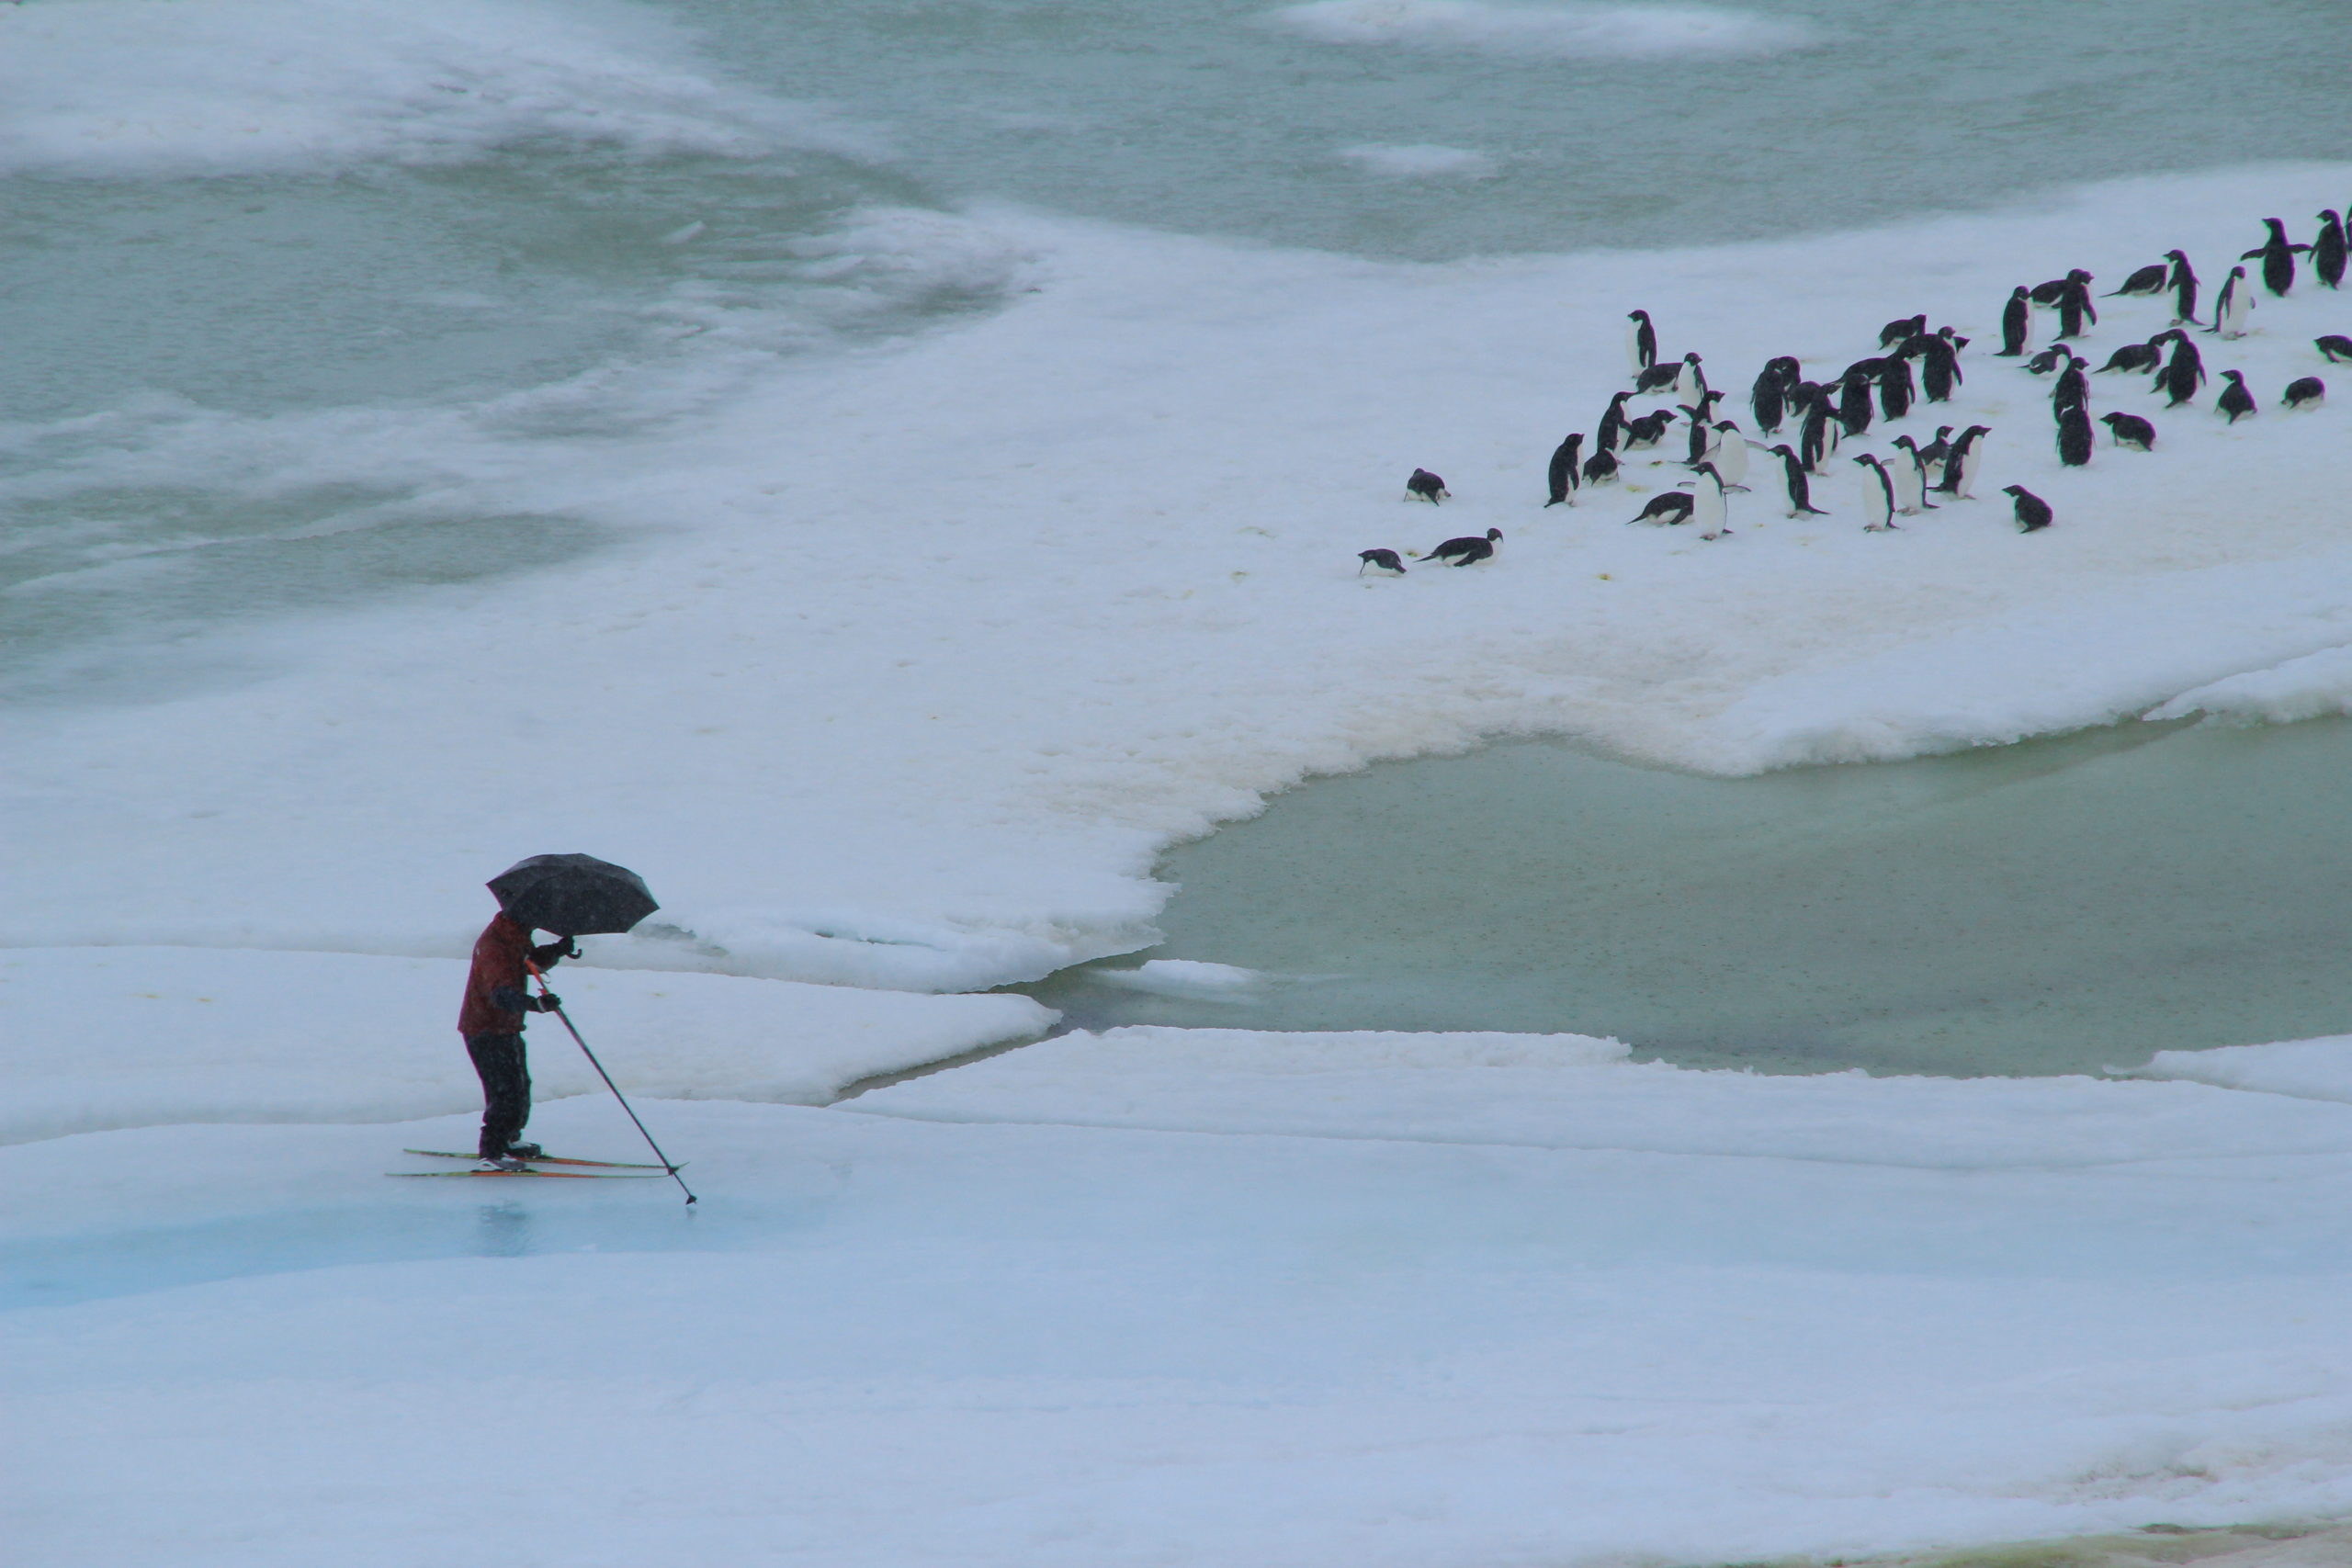 photograph of snowy ground surrounded by water, a man on skis with an umbrella and penguins huddled in the rain